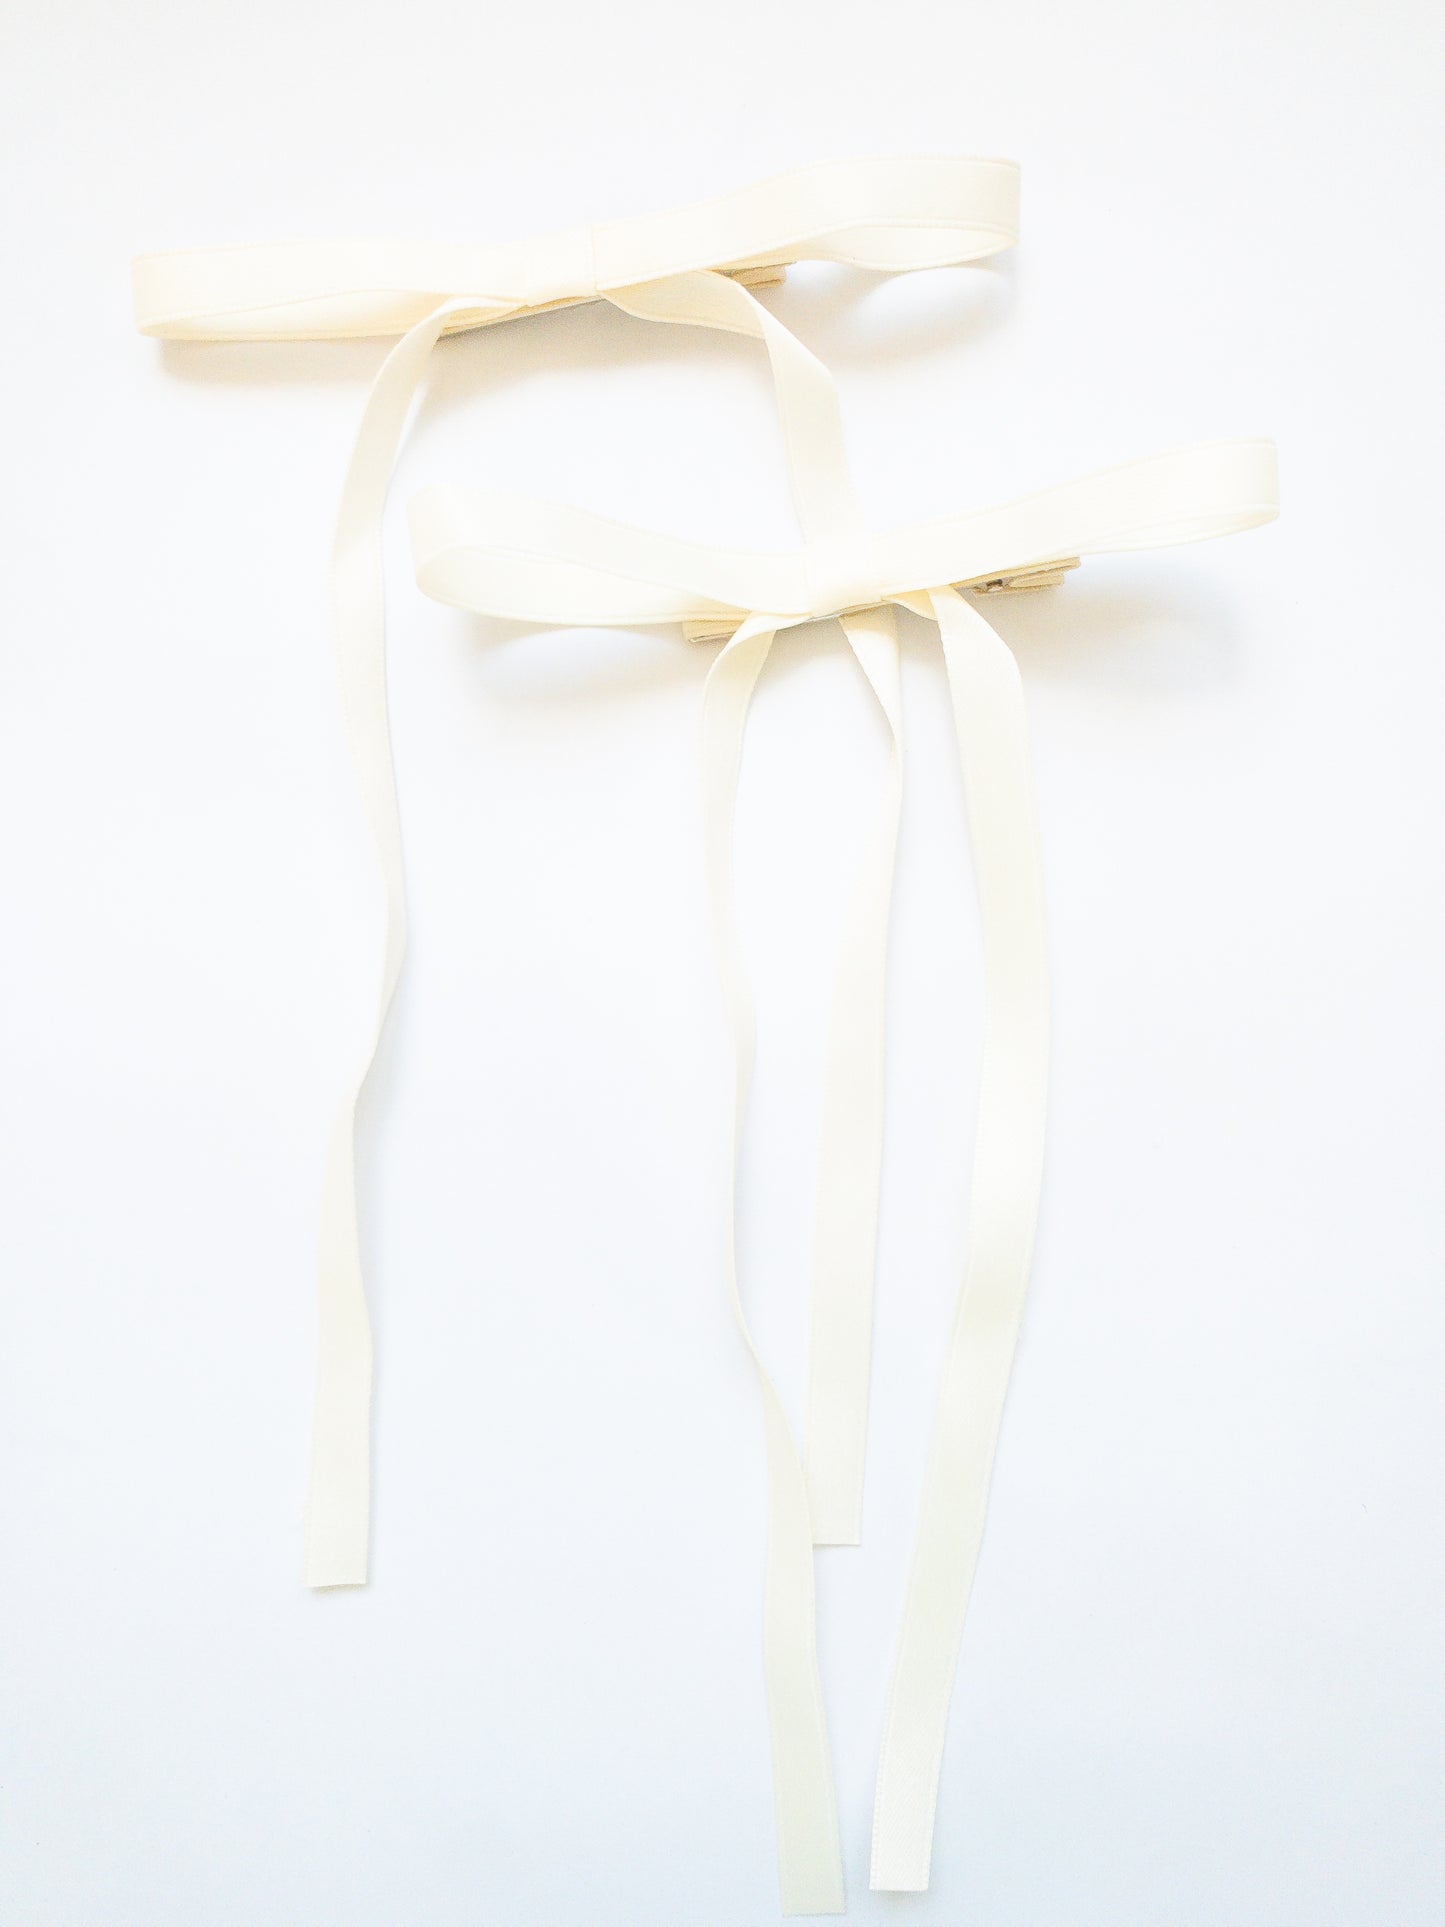 Ballet core in full effect! These ribbon bows come as a set of 2 hair alligator clips and come in 4 different classic colors. Each bow is crafted with a beautiful ribbon and all you have to do is pinch and clip.